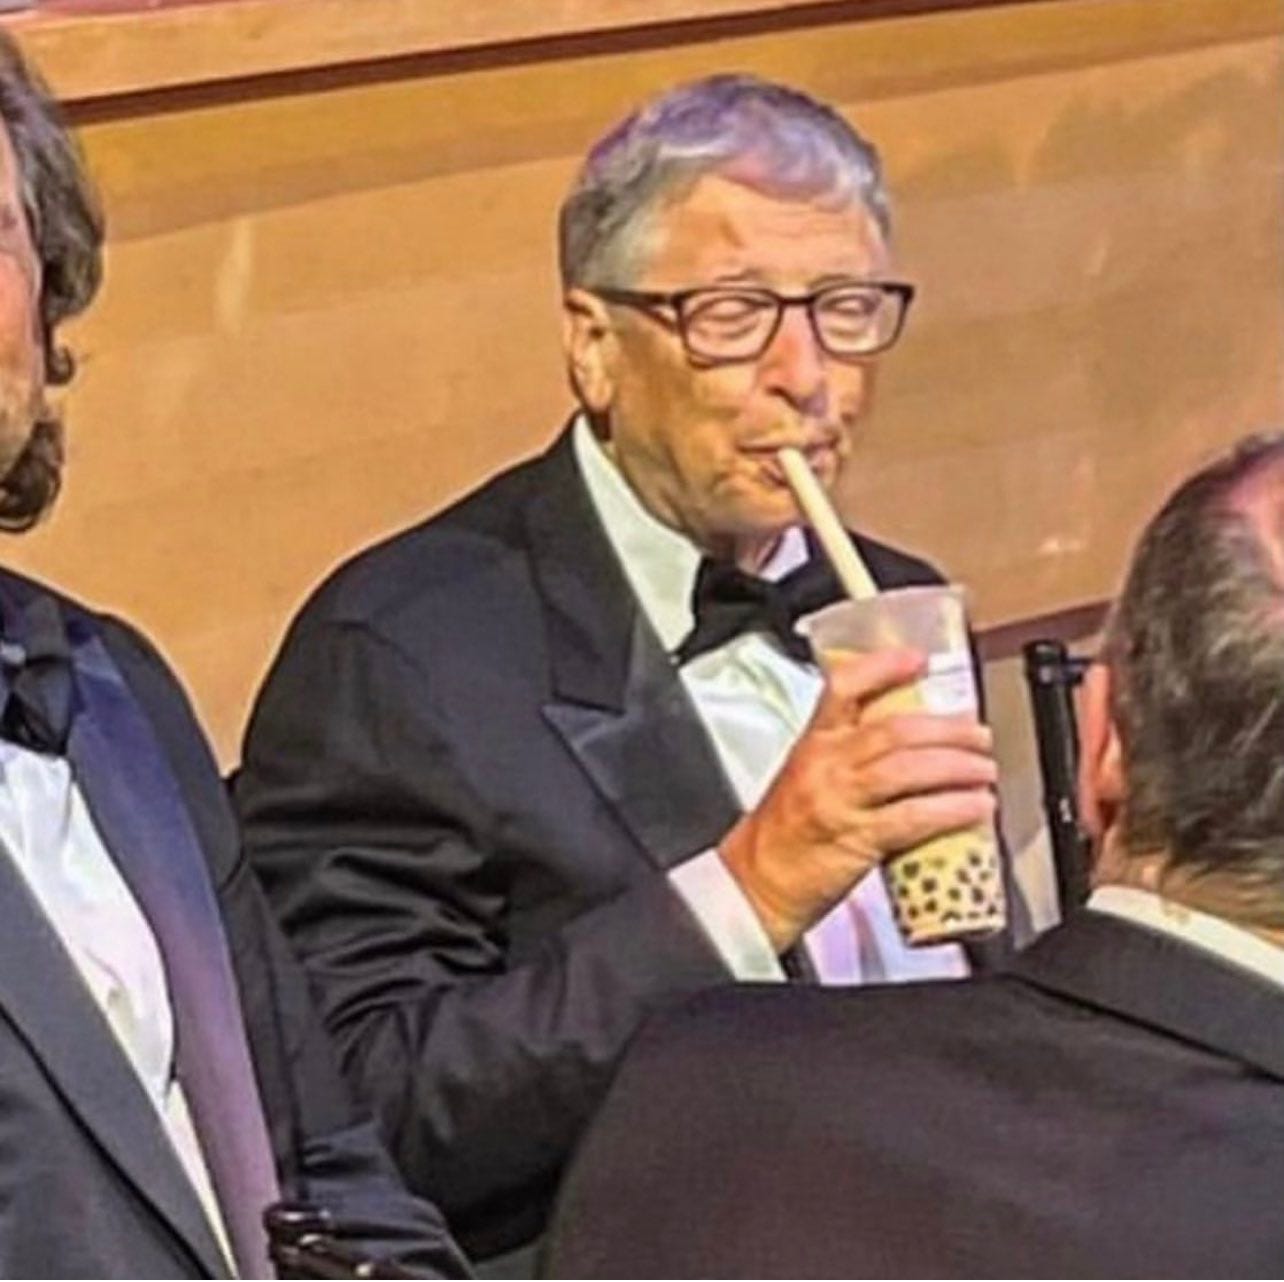 Emily on Twitter: "This pic of Bill Gates drinking bubble tea is sending me  over the edge https://t.co/WWpyi1sevx" / Twitter